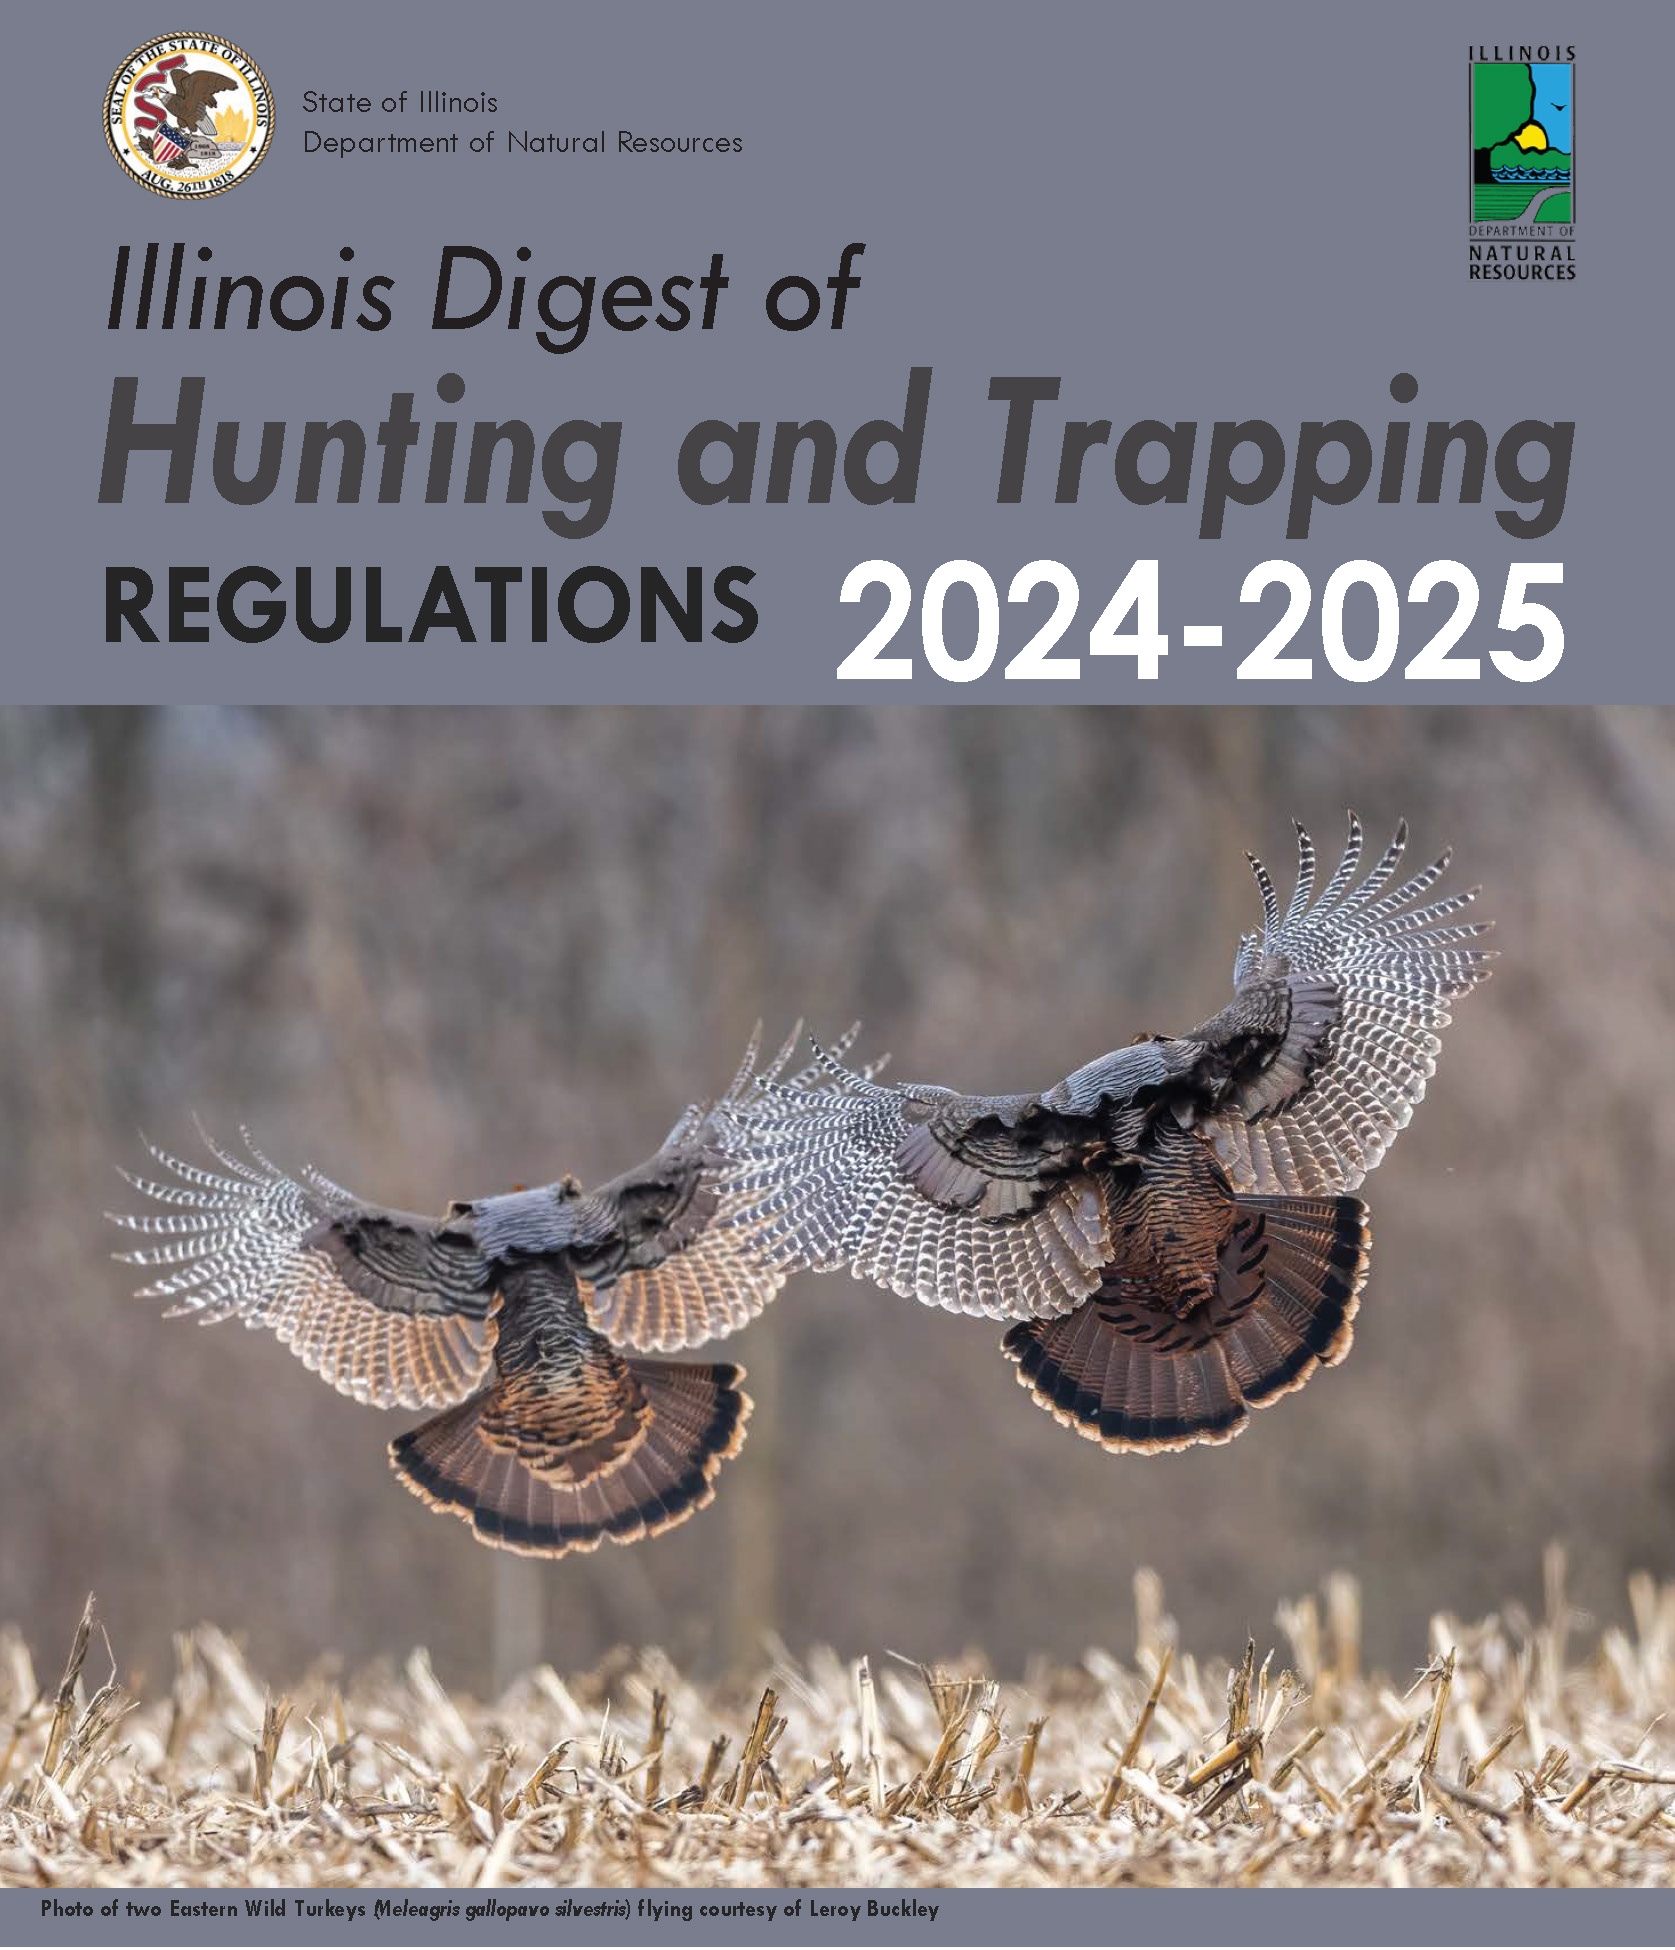 2024-2025 Hunting and Trapping Digest Cover